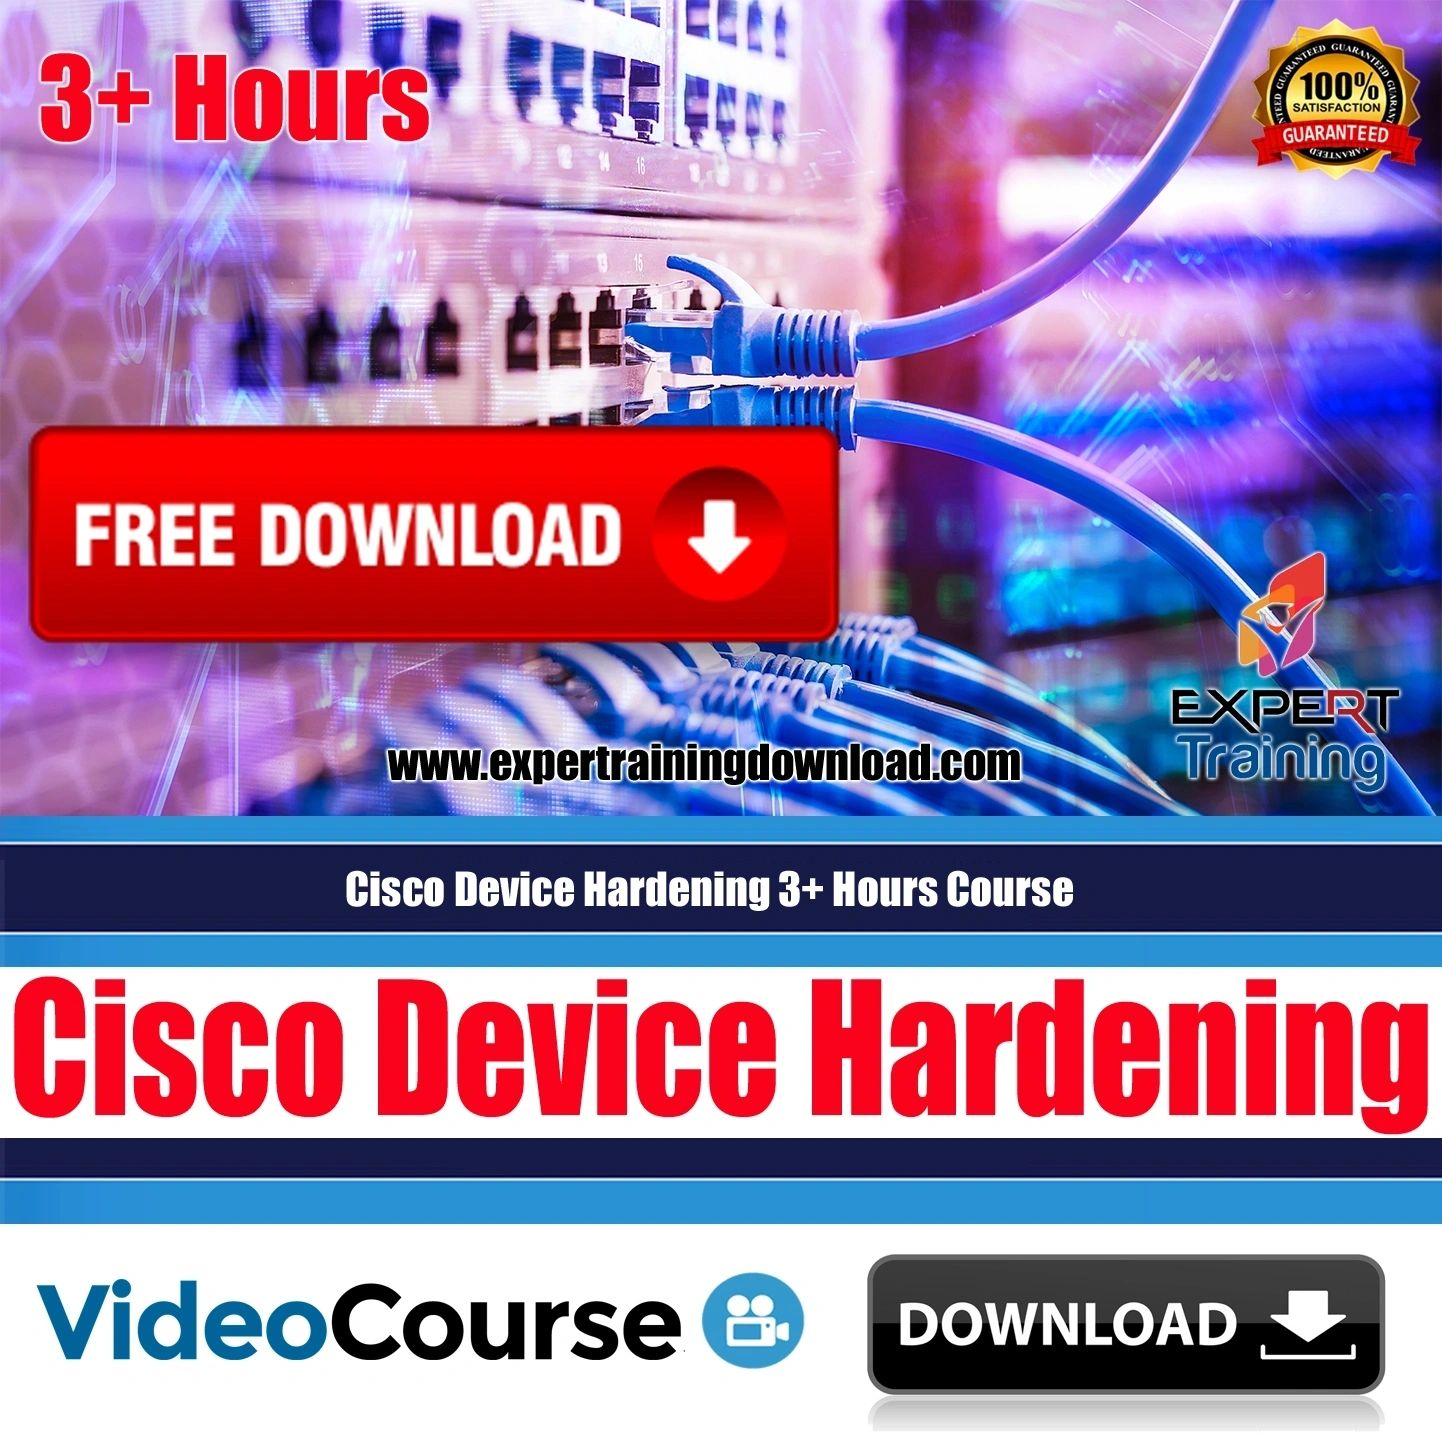 Cisco Device Hardening 3+ Hours Course (FREE DOWNLOAD)